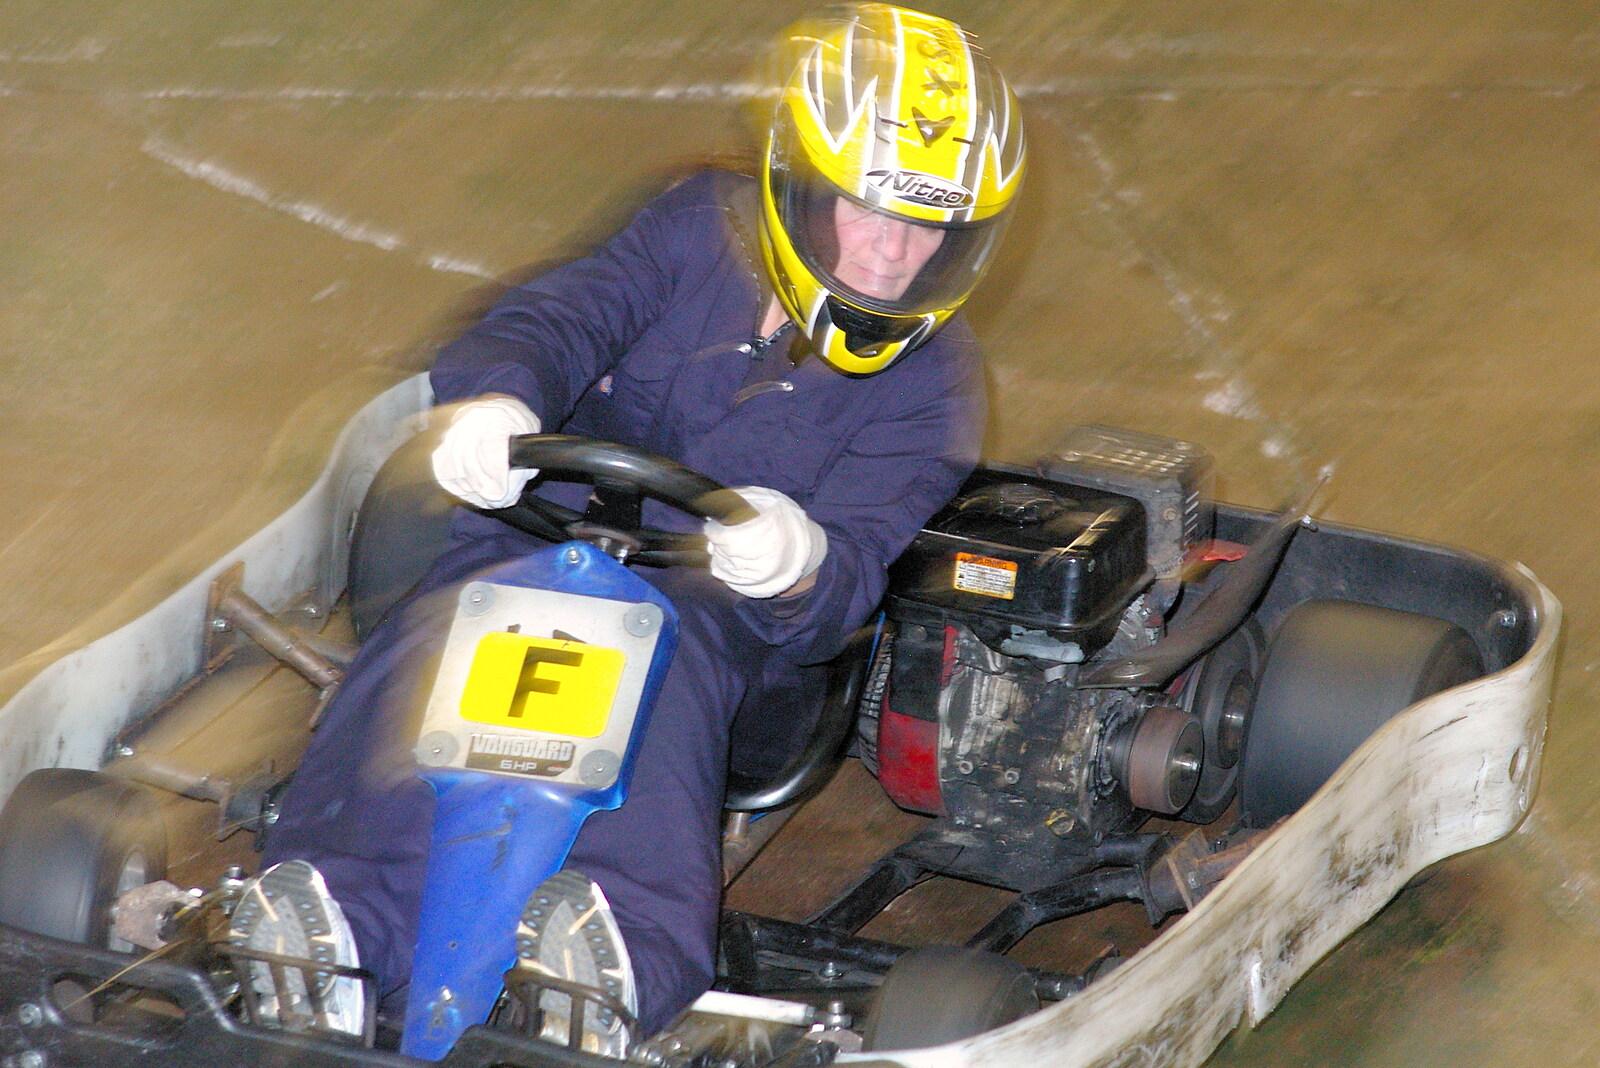 Tim makes a turn from Qualcomm goes Karting in Caxton, Cambridgeshire - 7th November 2005